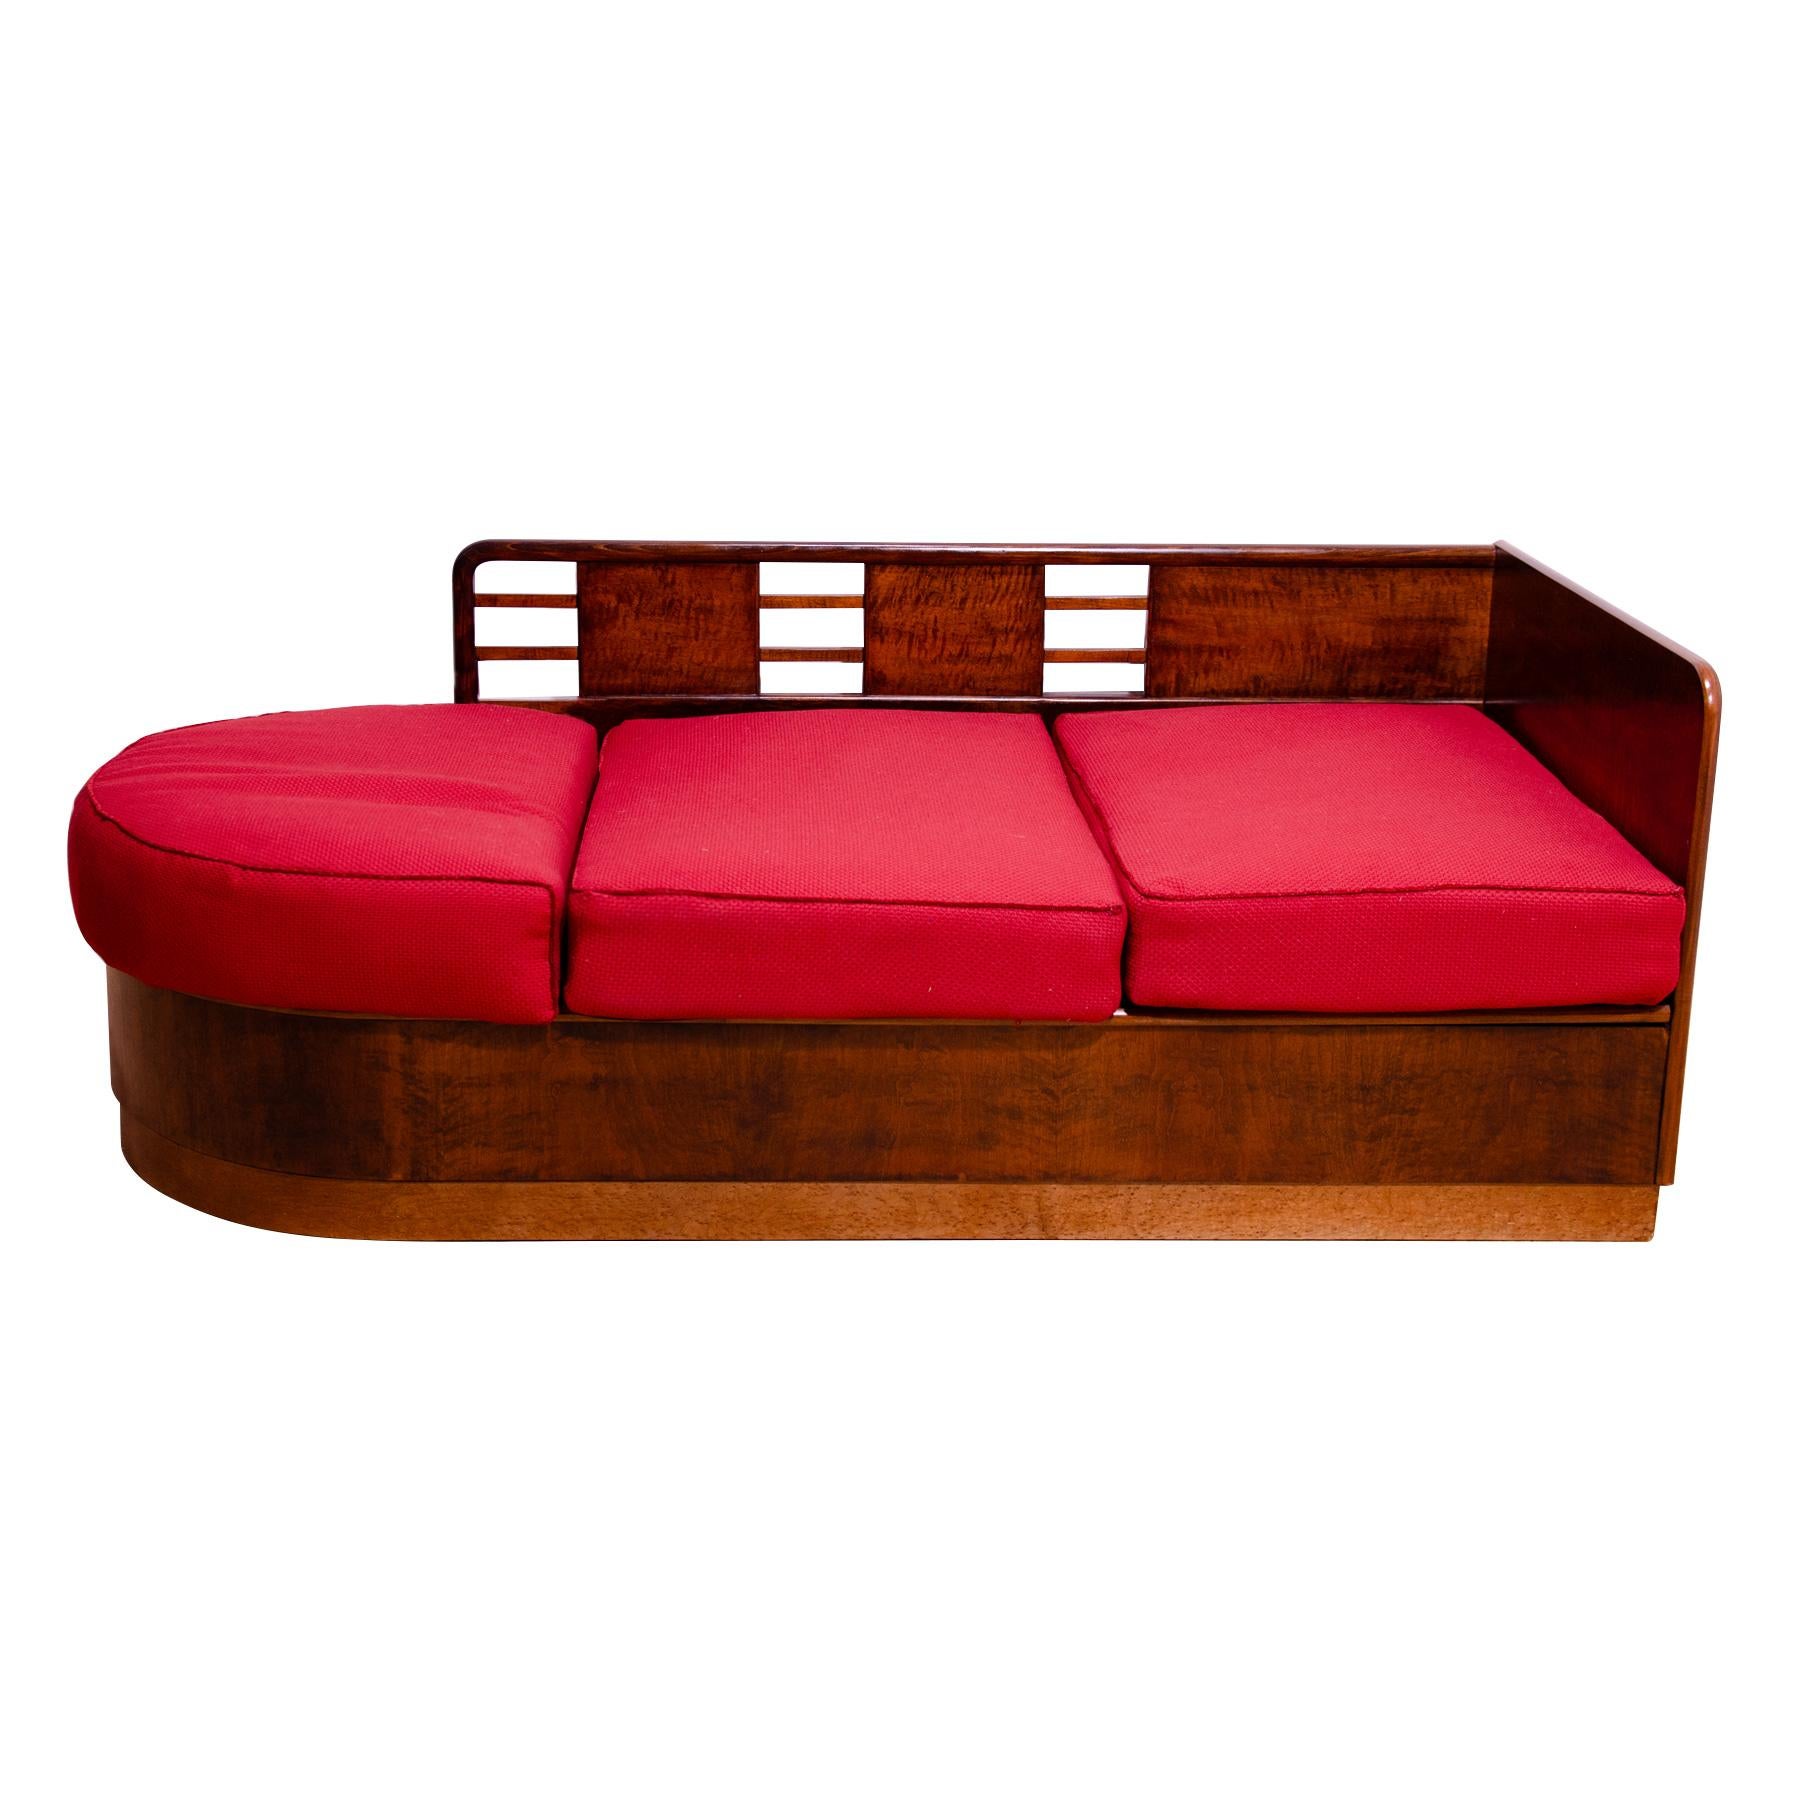 This ART DECO style sofa was designed and made in the 1930´s in the former Czechoslovakia. It was most likely made by Líšen company.
It features a very interesting design similar to the shape of a boat.
This simple design fits into the context of